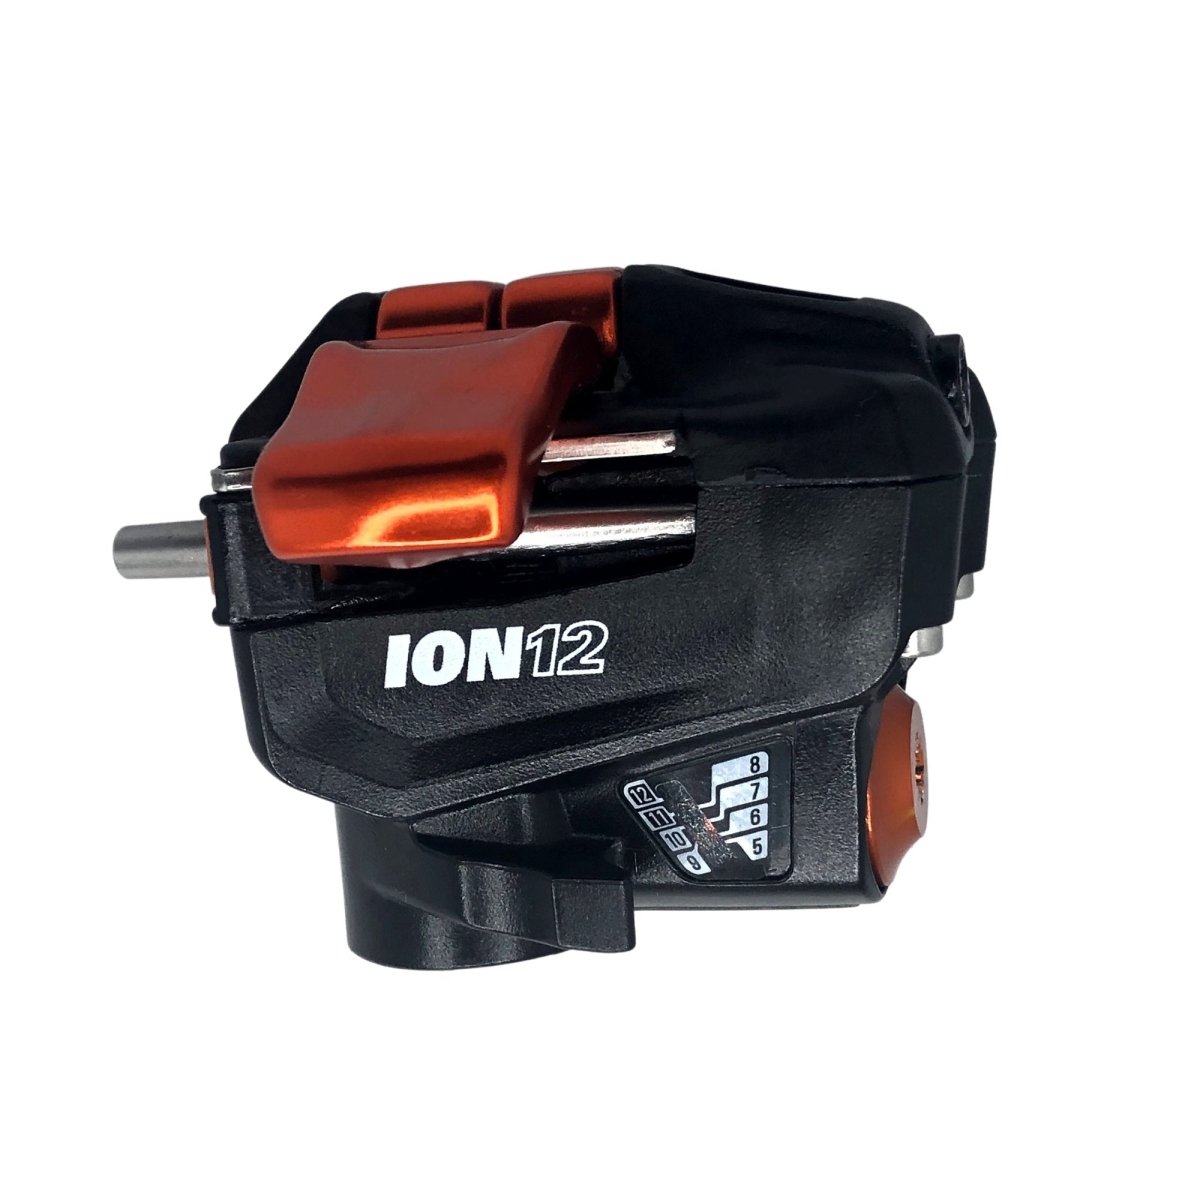 ION 12 Heel Turret Assembly (Black) - Parts - G3 Store [CAD]